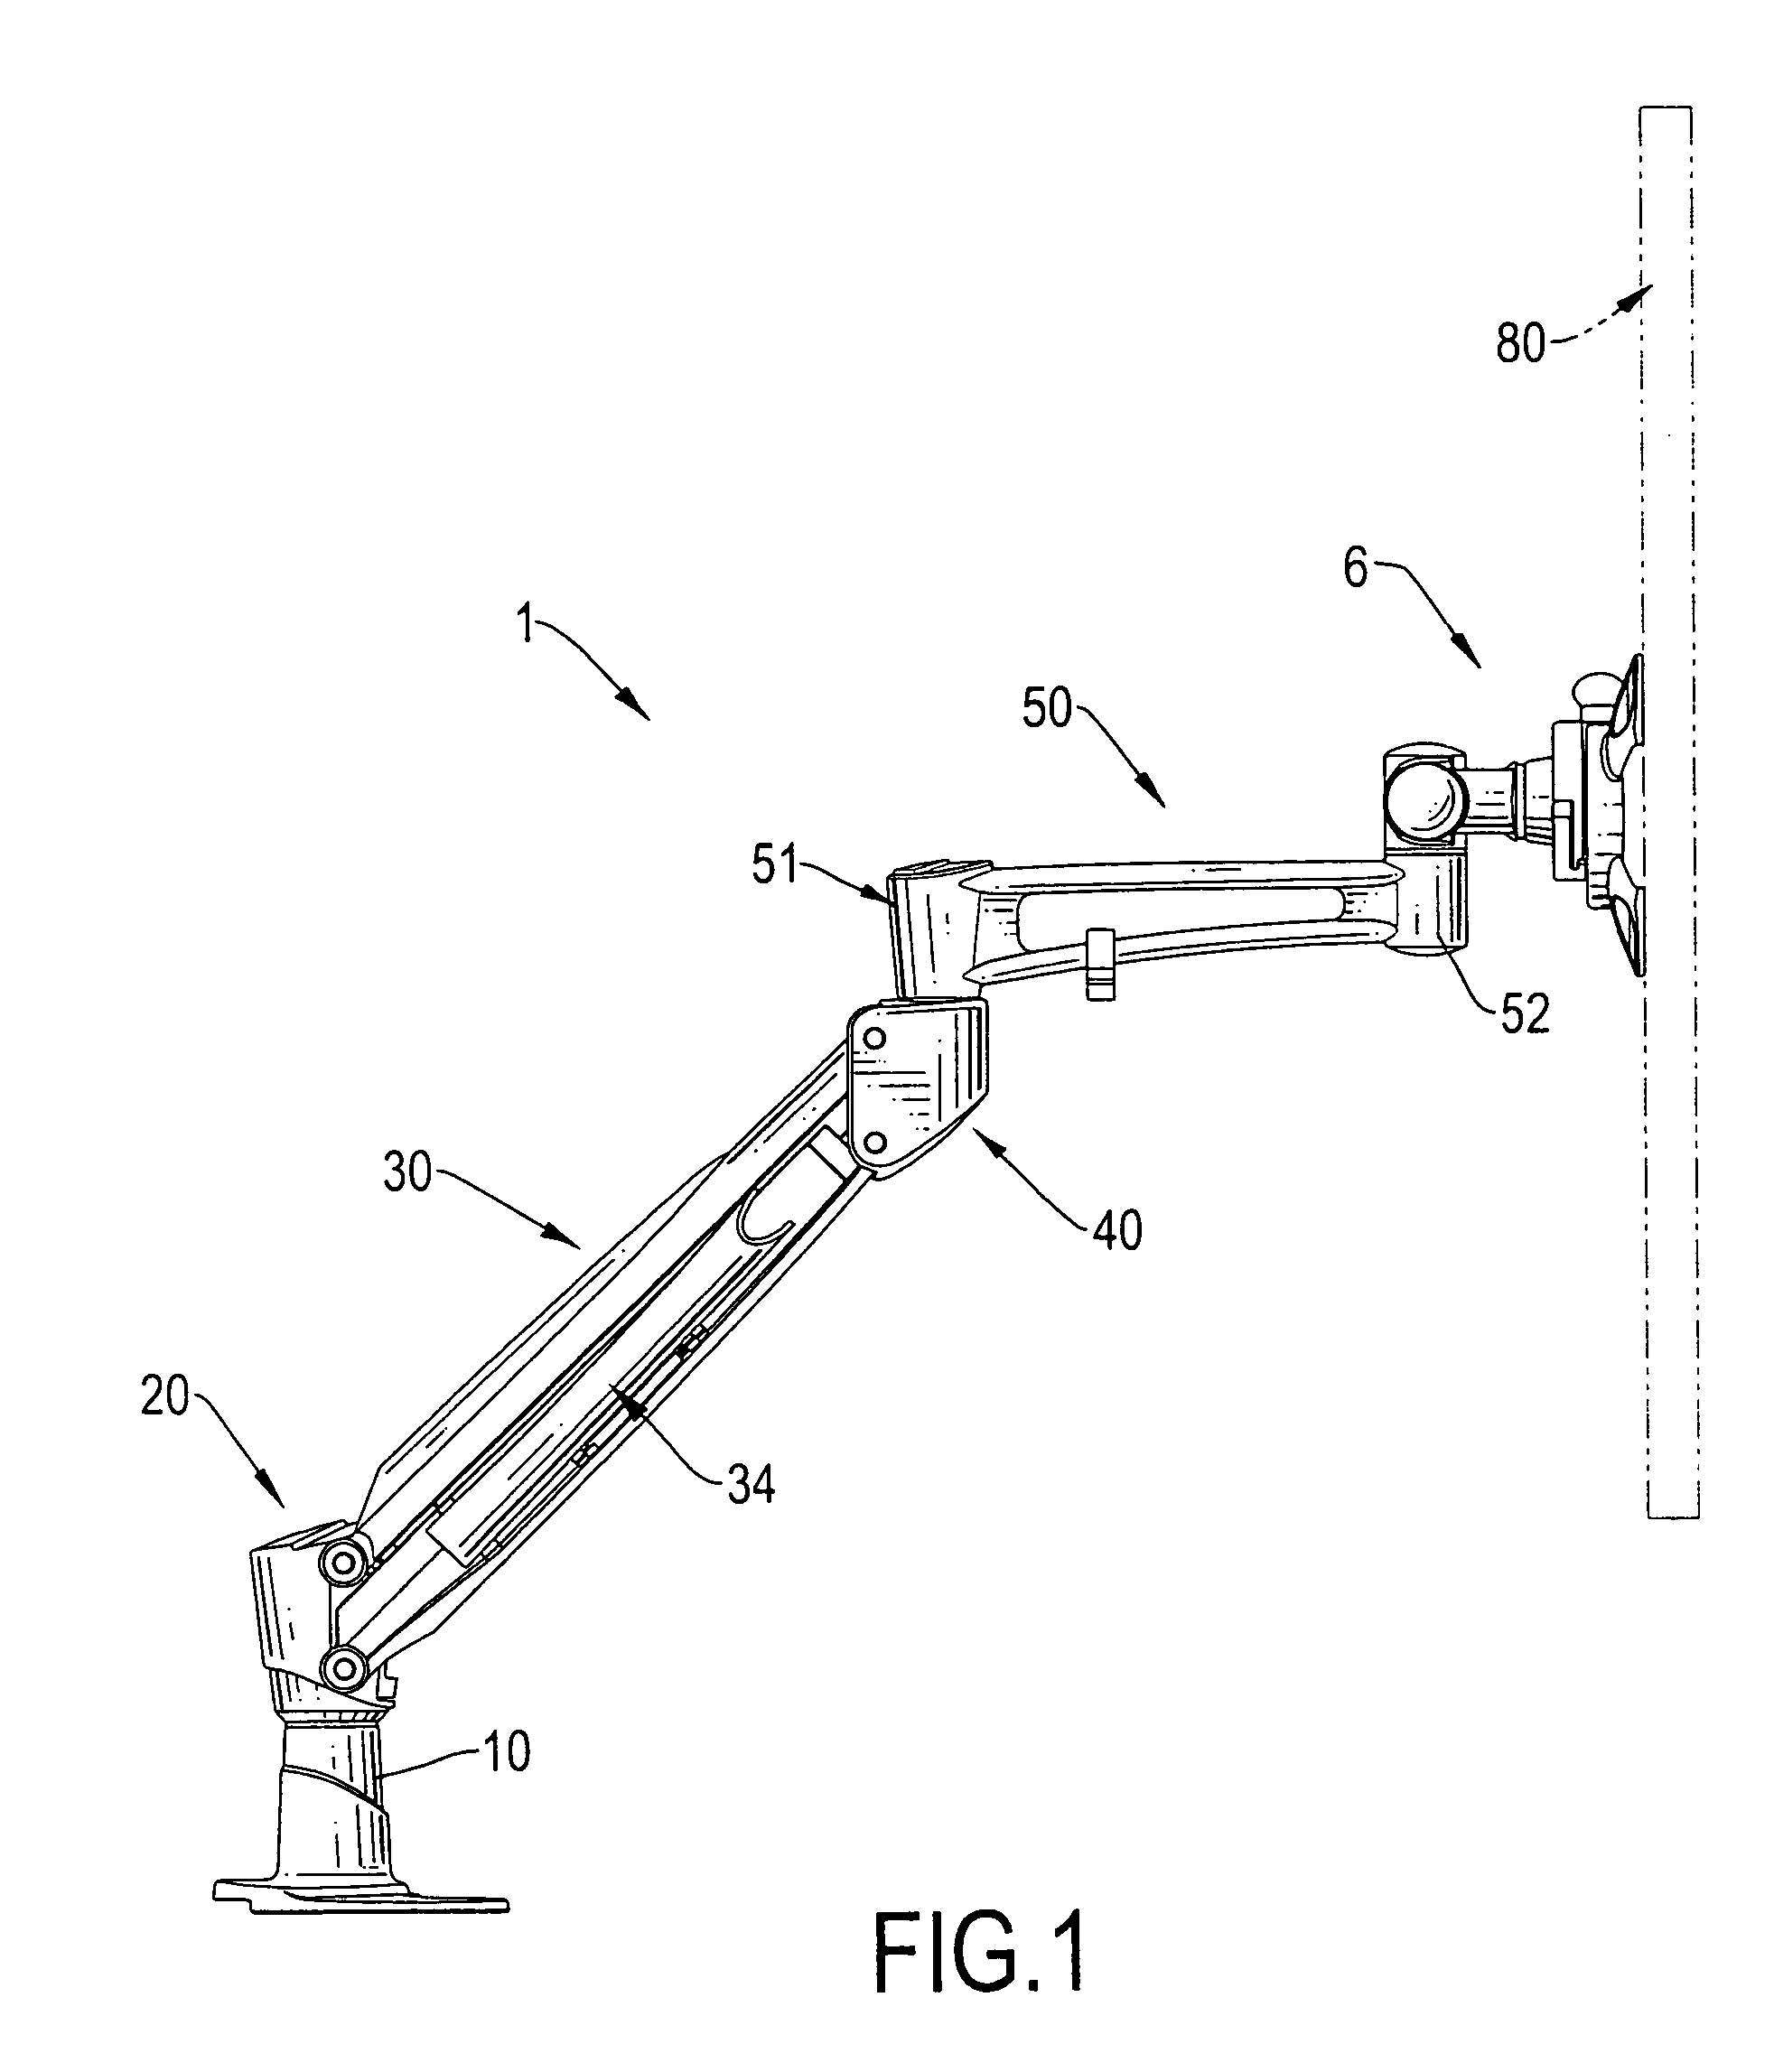 Support apparatus for suspending a monitor